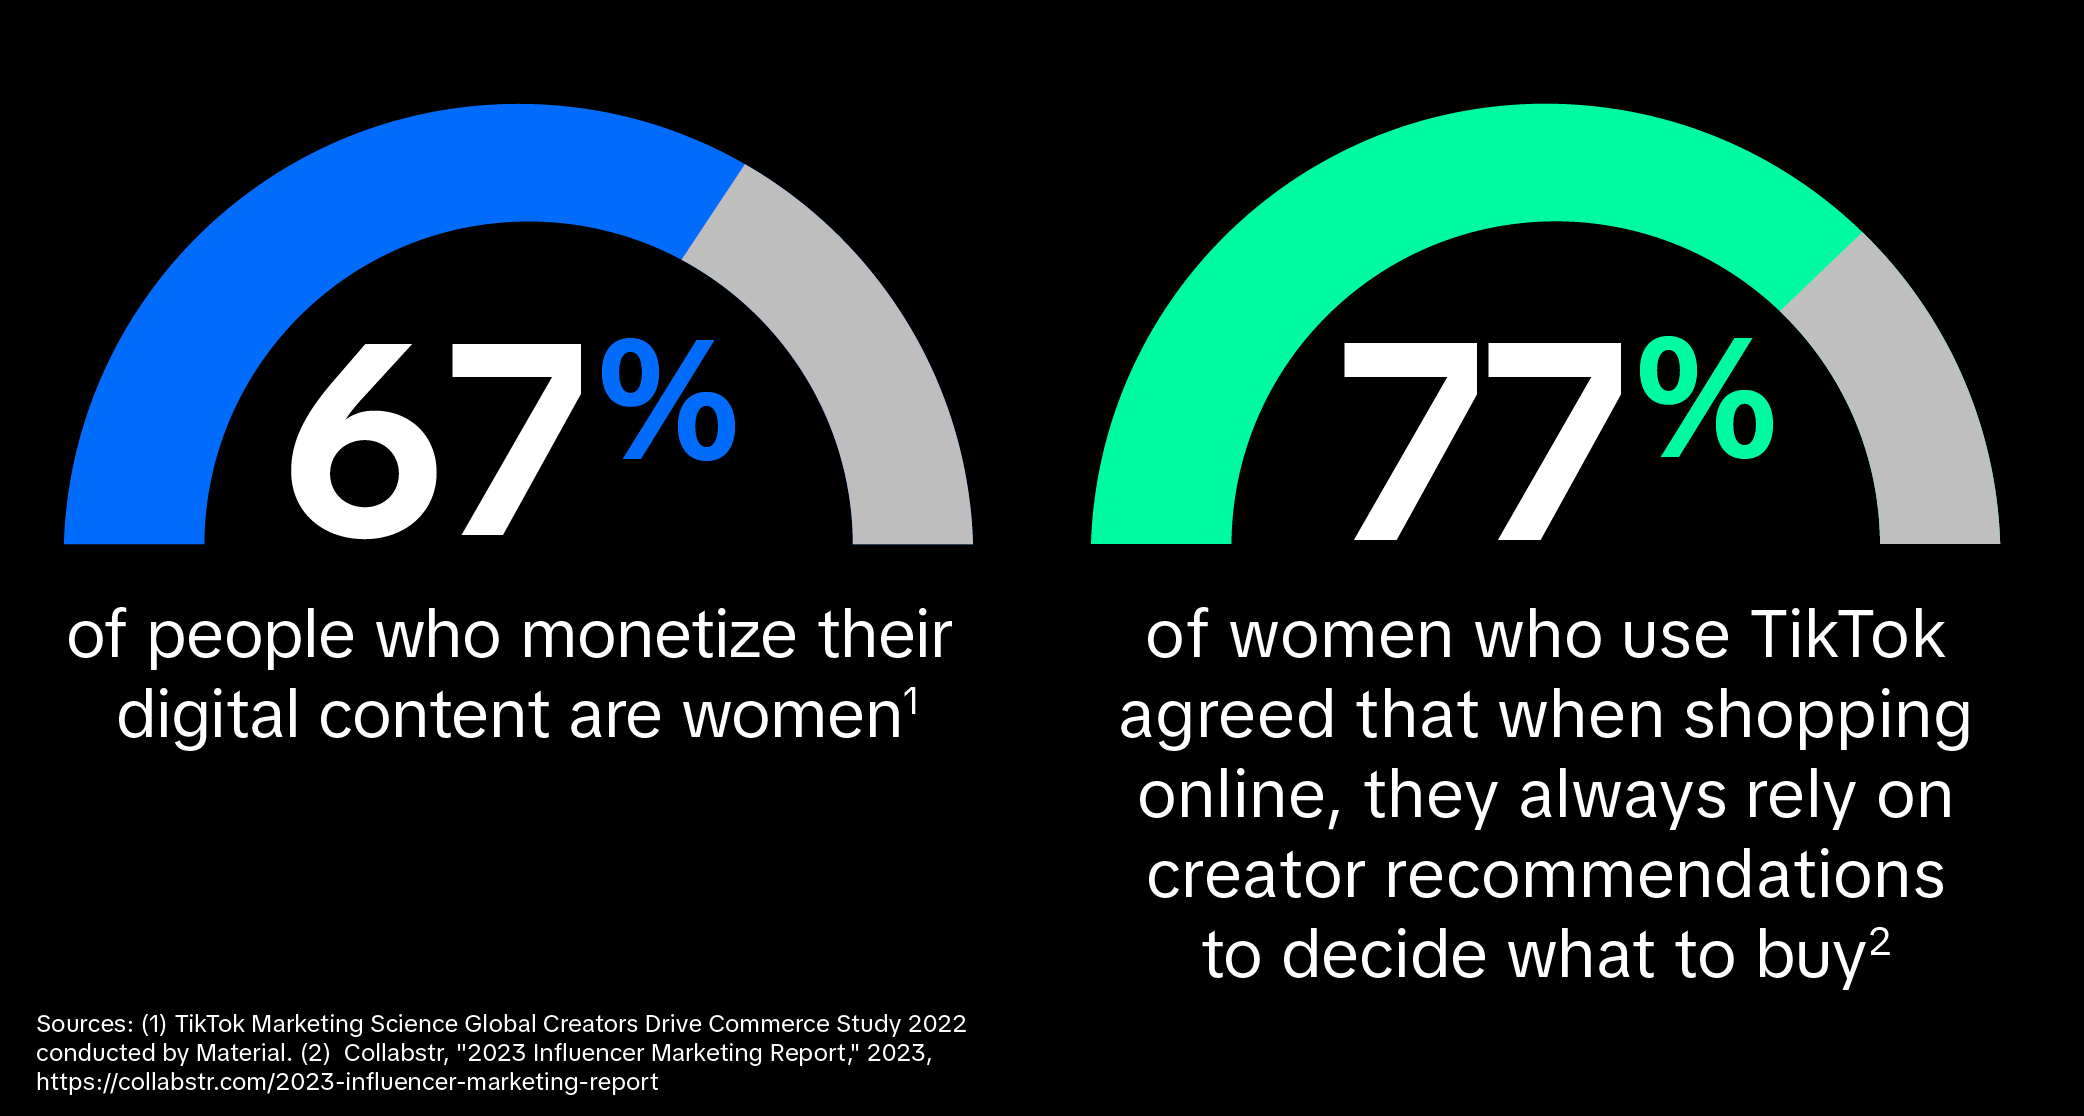 67% of people who monetize their digital content are women.